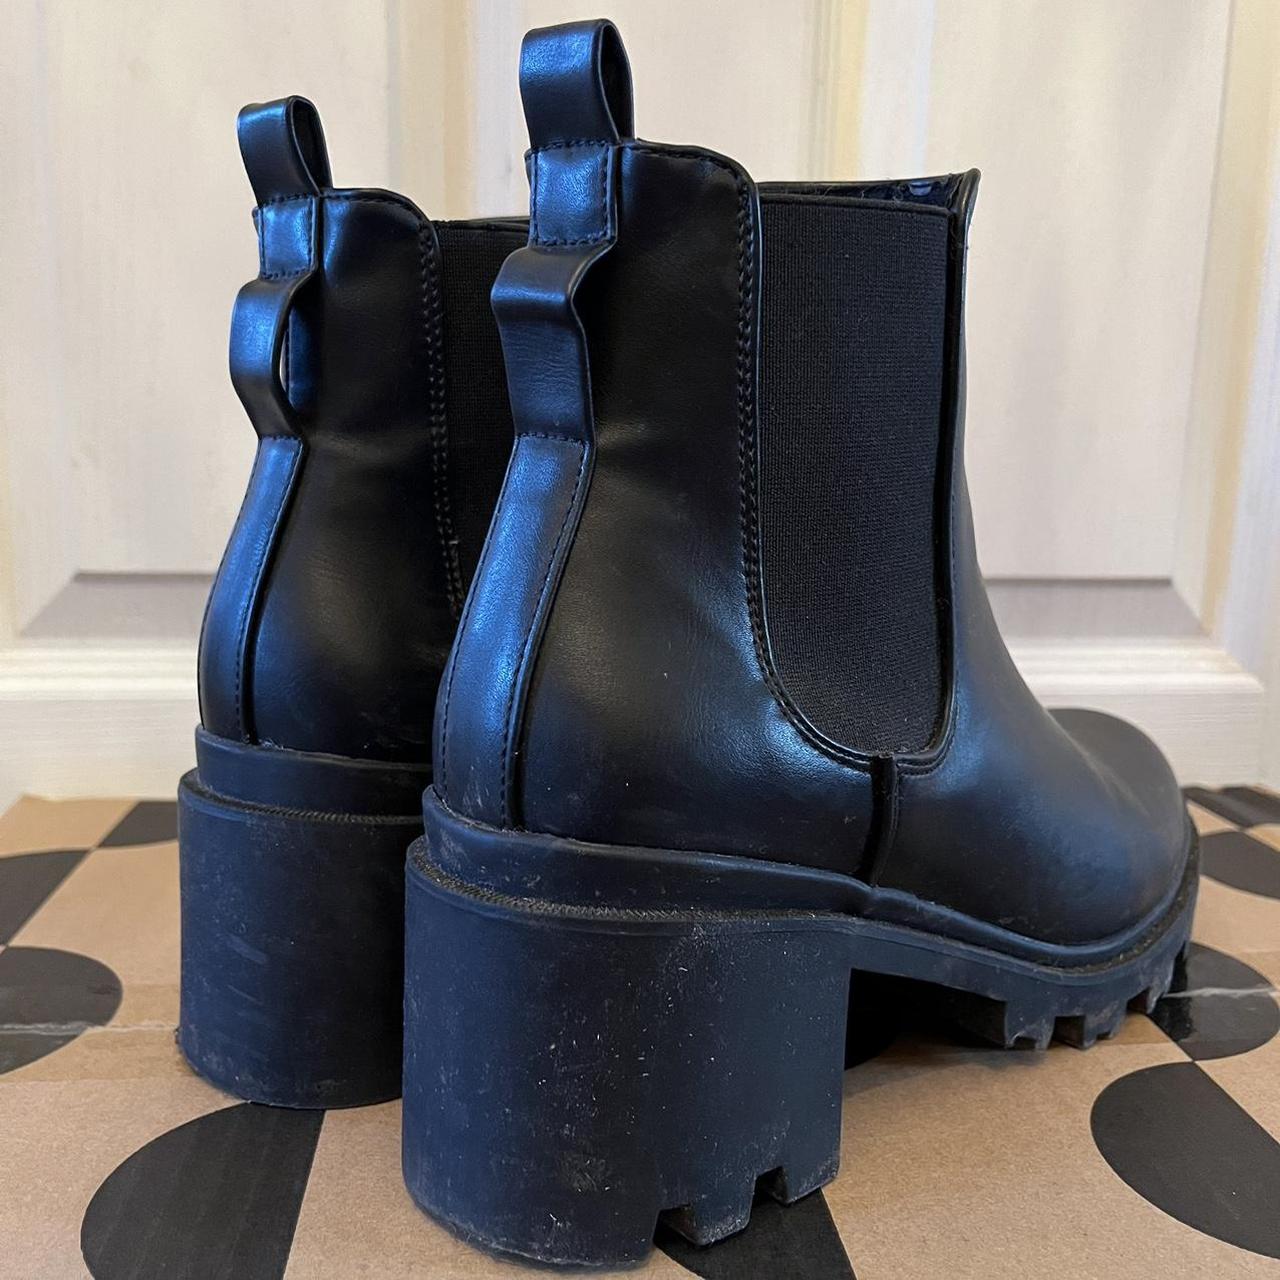 Black Faux Leather Ankle Boots Small Heel Elastic... - Depop